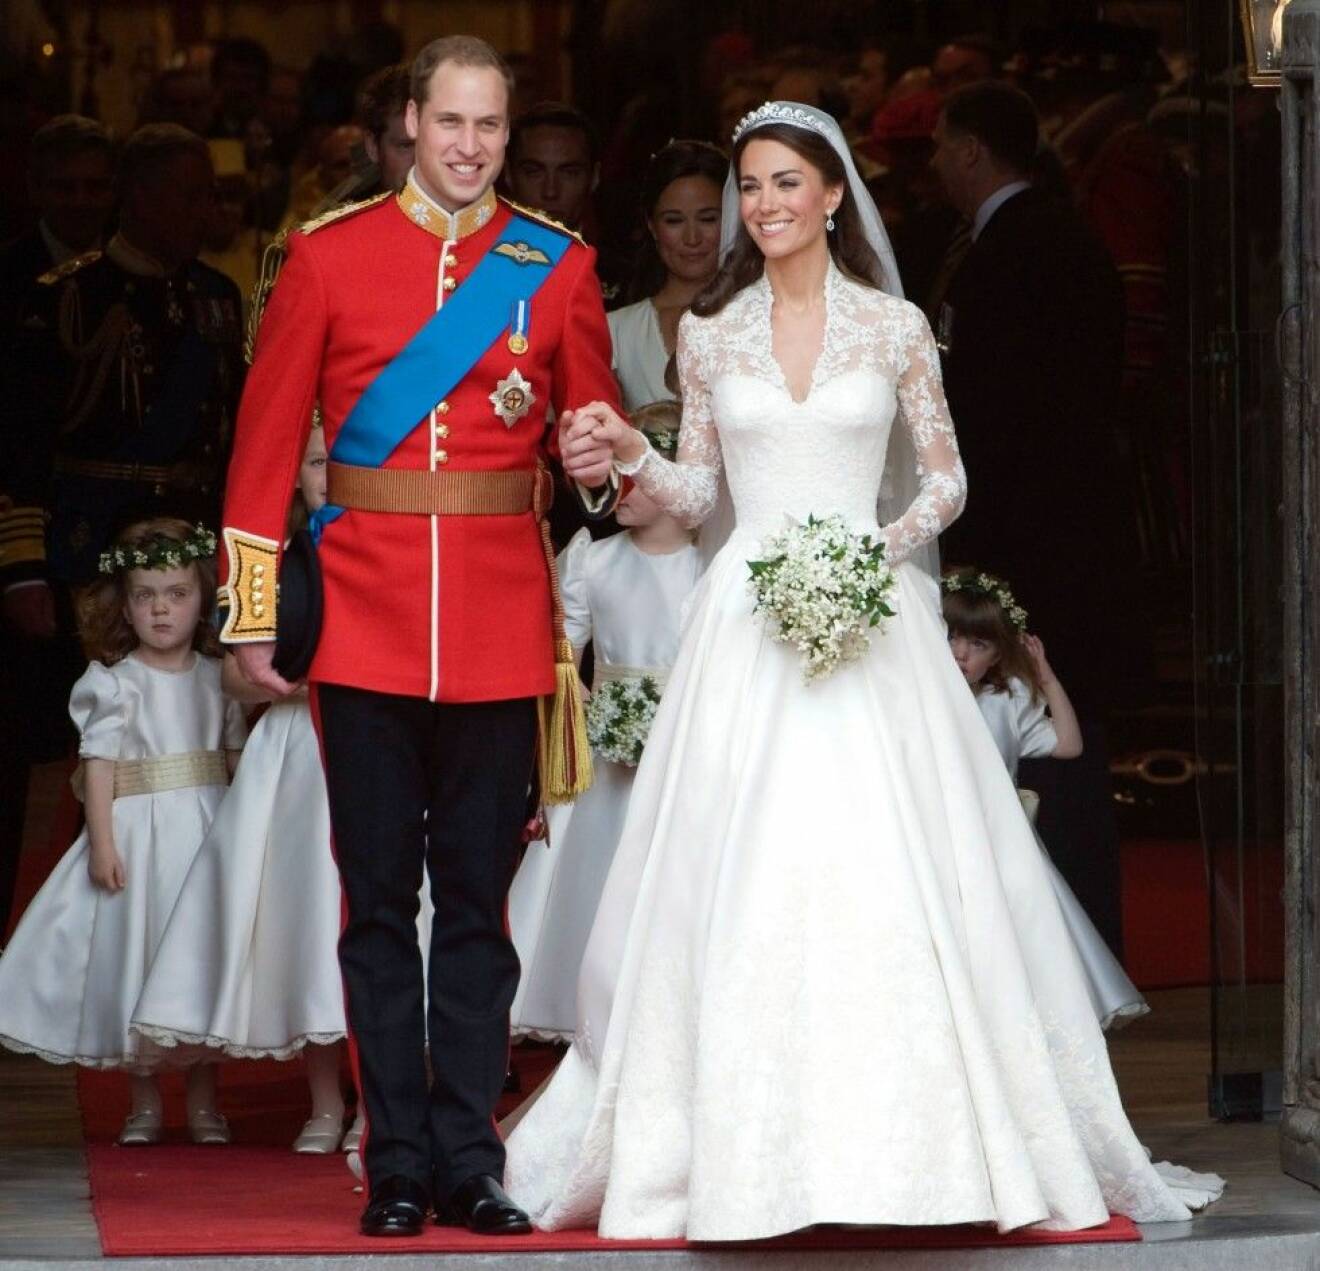 Royal Wedding Of Prince William Of Wales To Catherine Middleton (kate Middleton) On 29th April 2011 Evening Standard Npa Pool Picture Of Prince William And His New Wife The Duchess Of Cambridge As They Leave Westminster Following Their Marriage Cerem